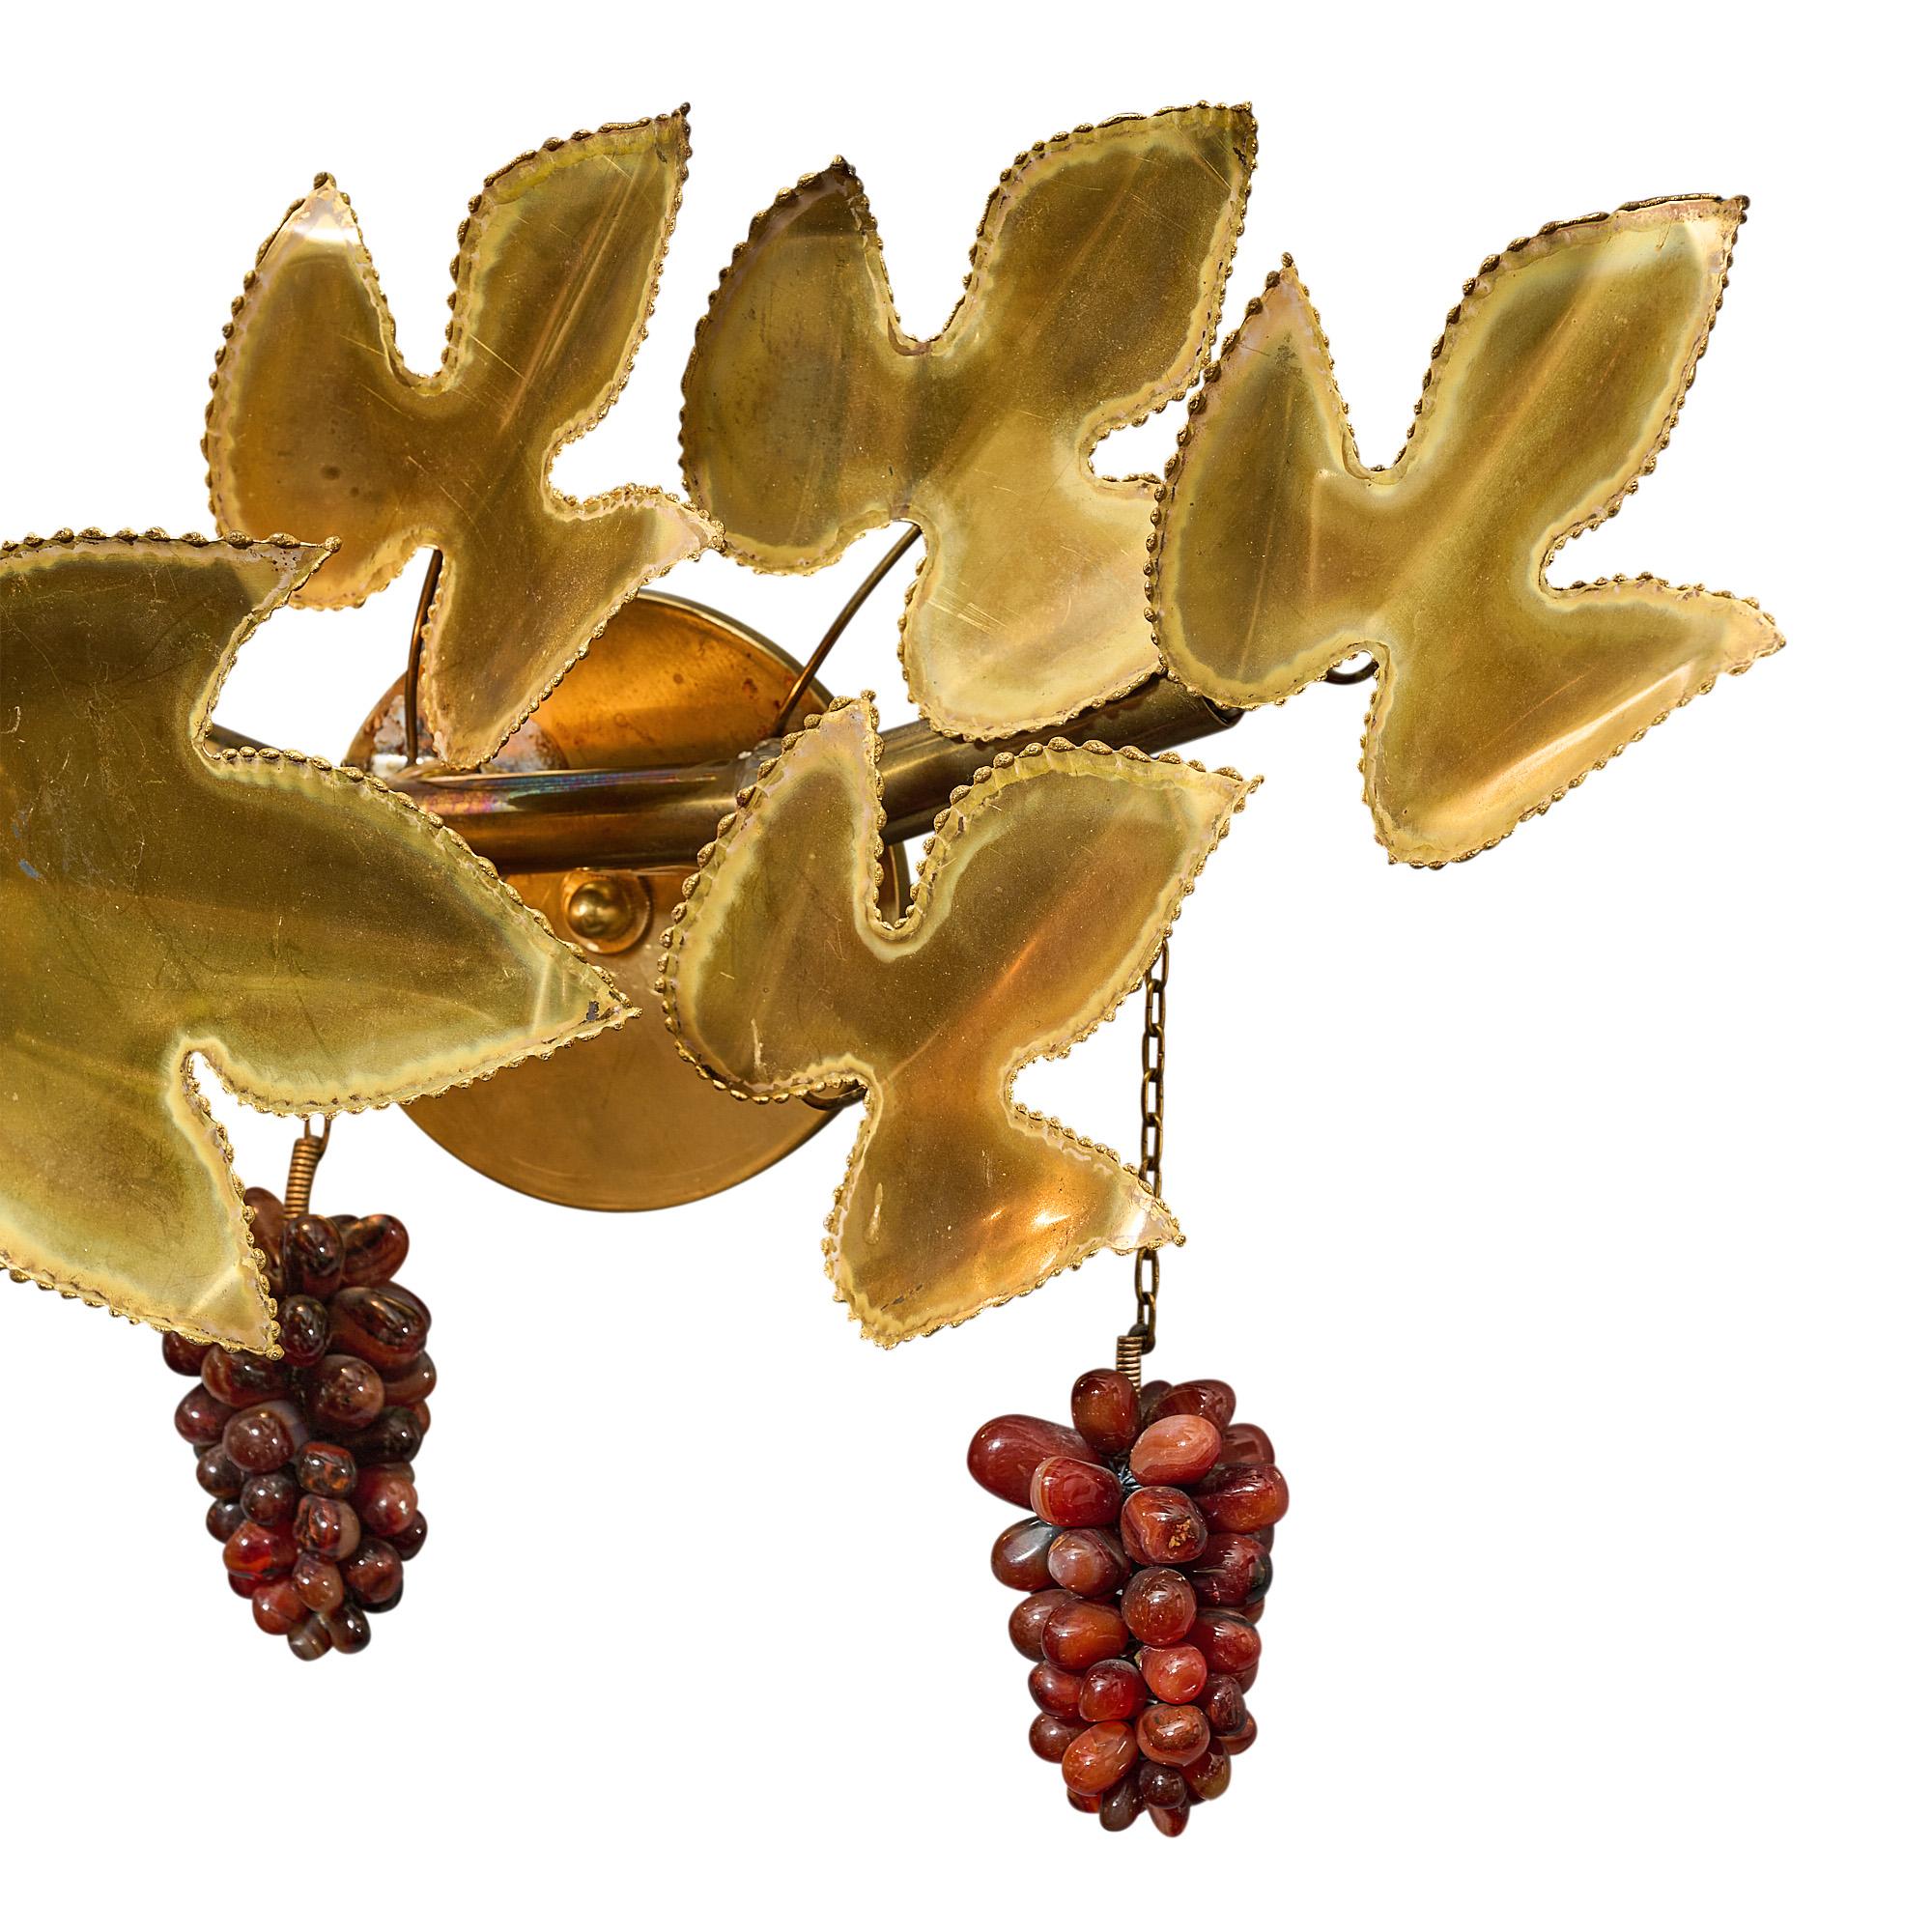 Sconce, French, by Christian Techoueyres for Maison Jansen. The fixture features vine of embossed brass and glass grapes. It has been newly wired to fit US standards.